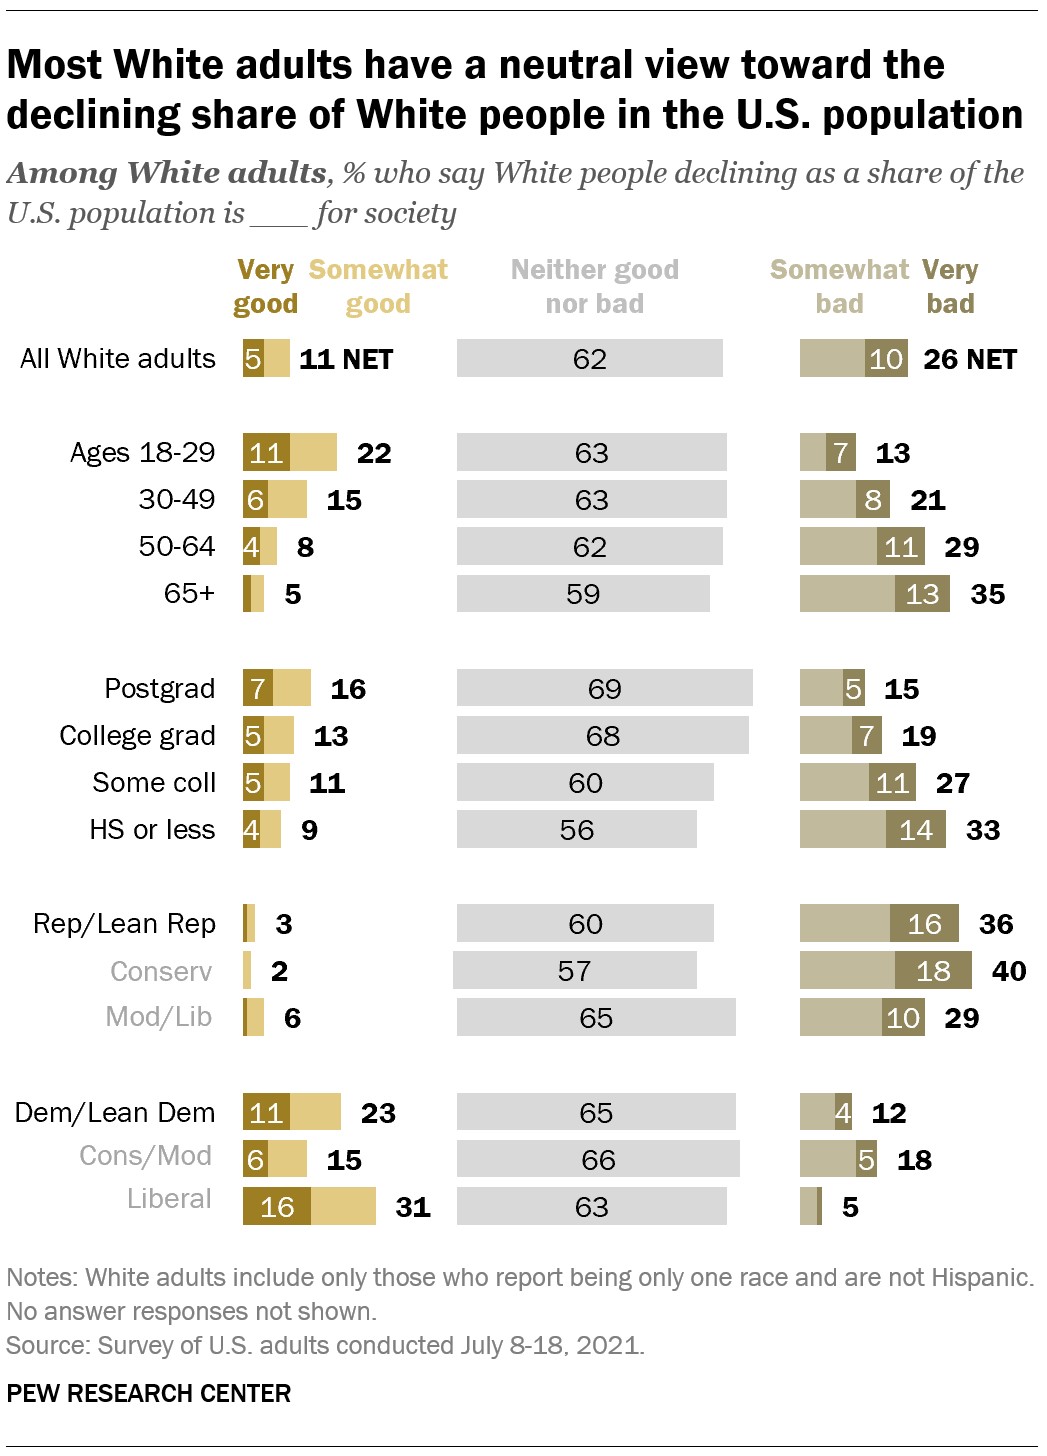 Most in U.S. say declining White share of population neither good nor